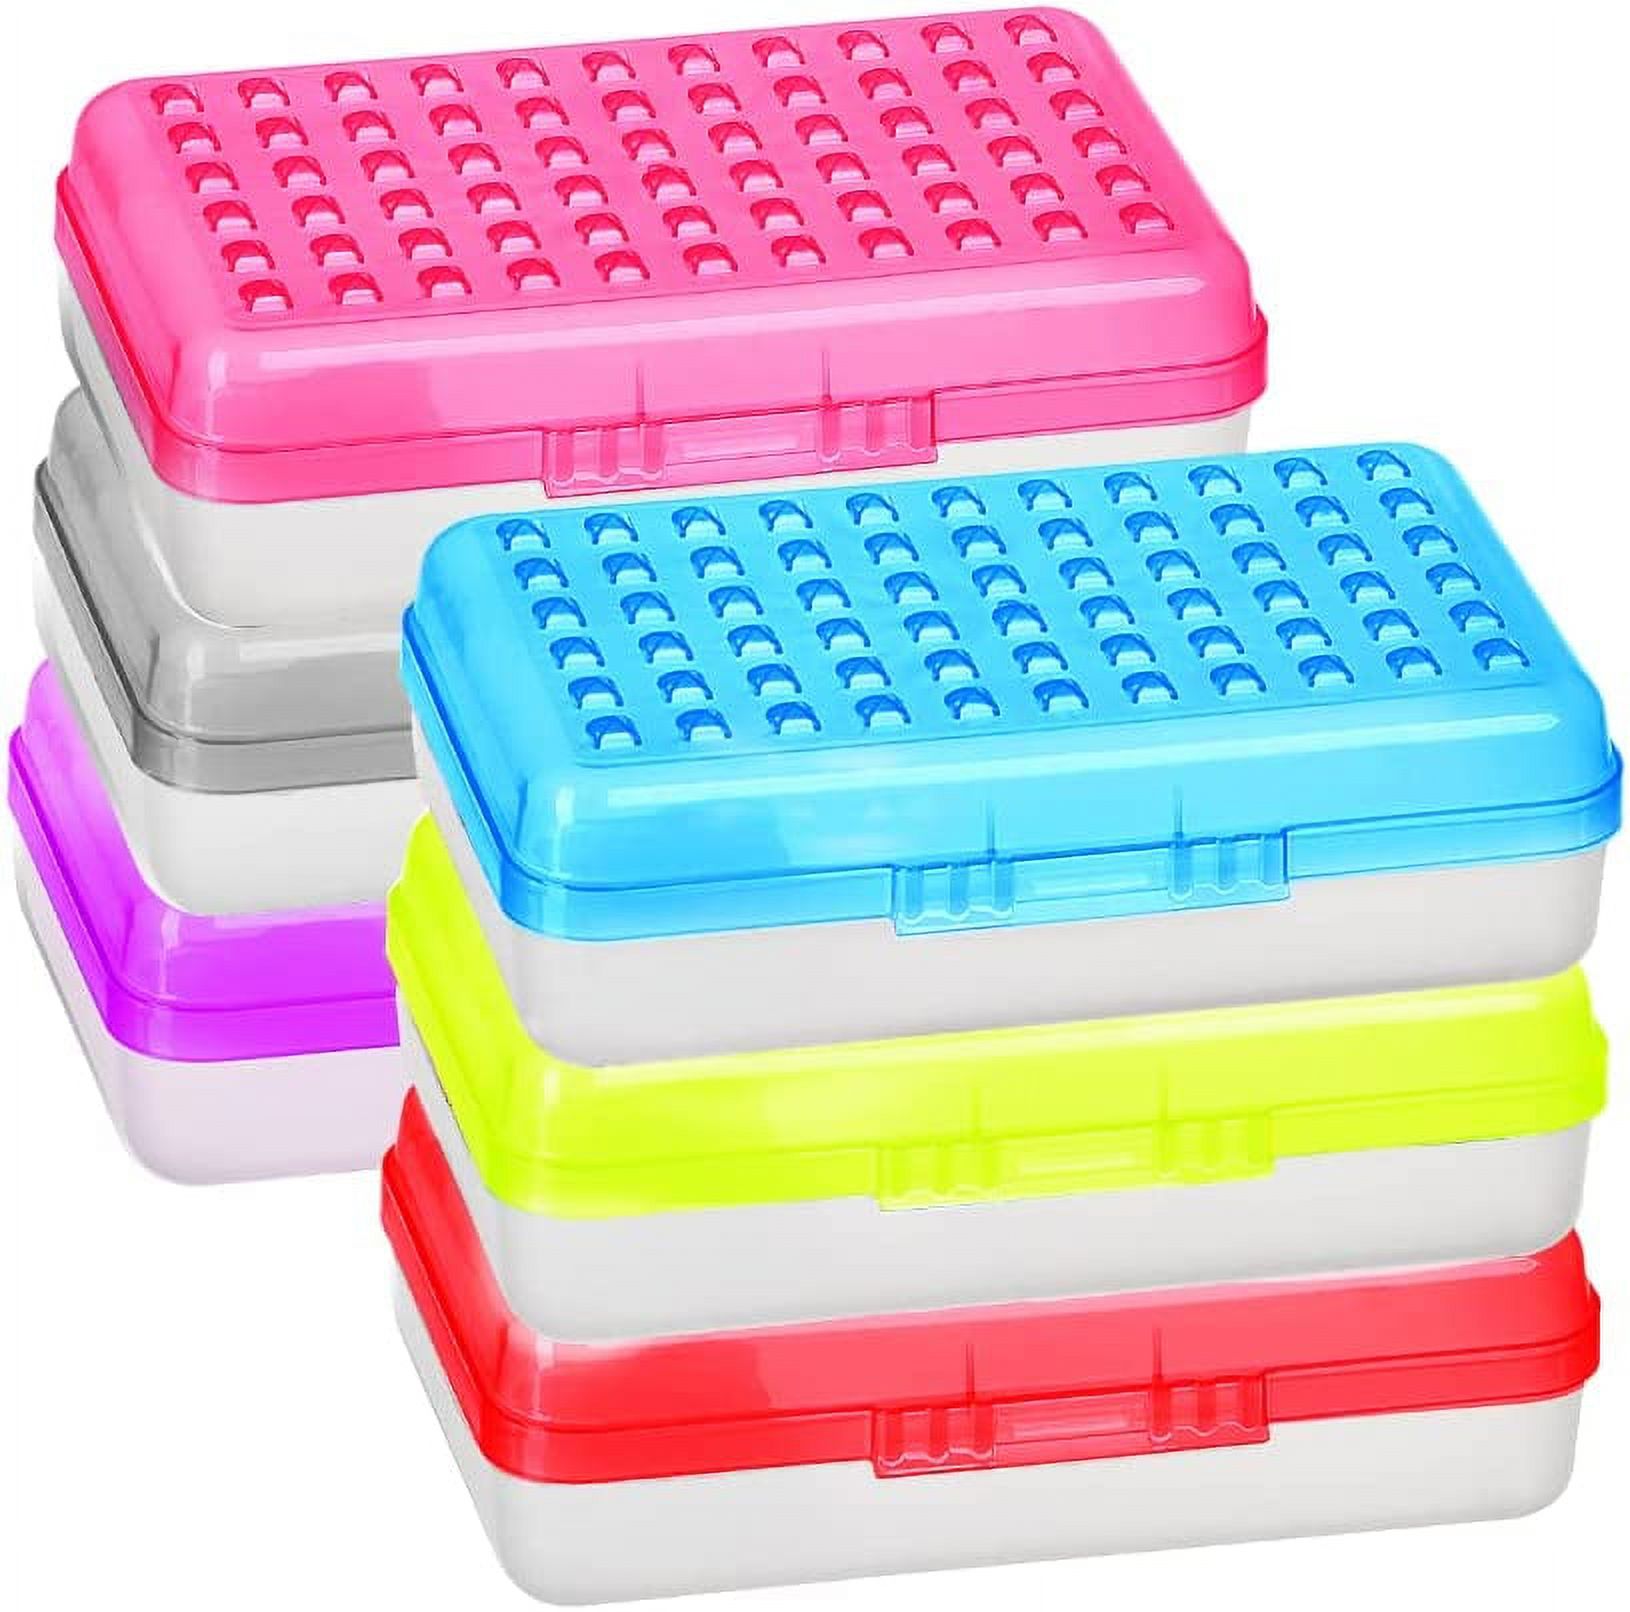 Pencil Box for Kids School Supply Box Pencil Case – 6 Pack Assorted colors  Pencil Case Box for organize, school pencil box Plastic Pencil Case Plastic